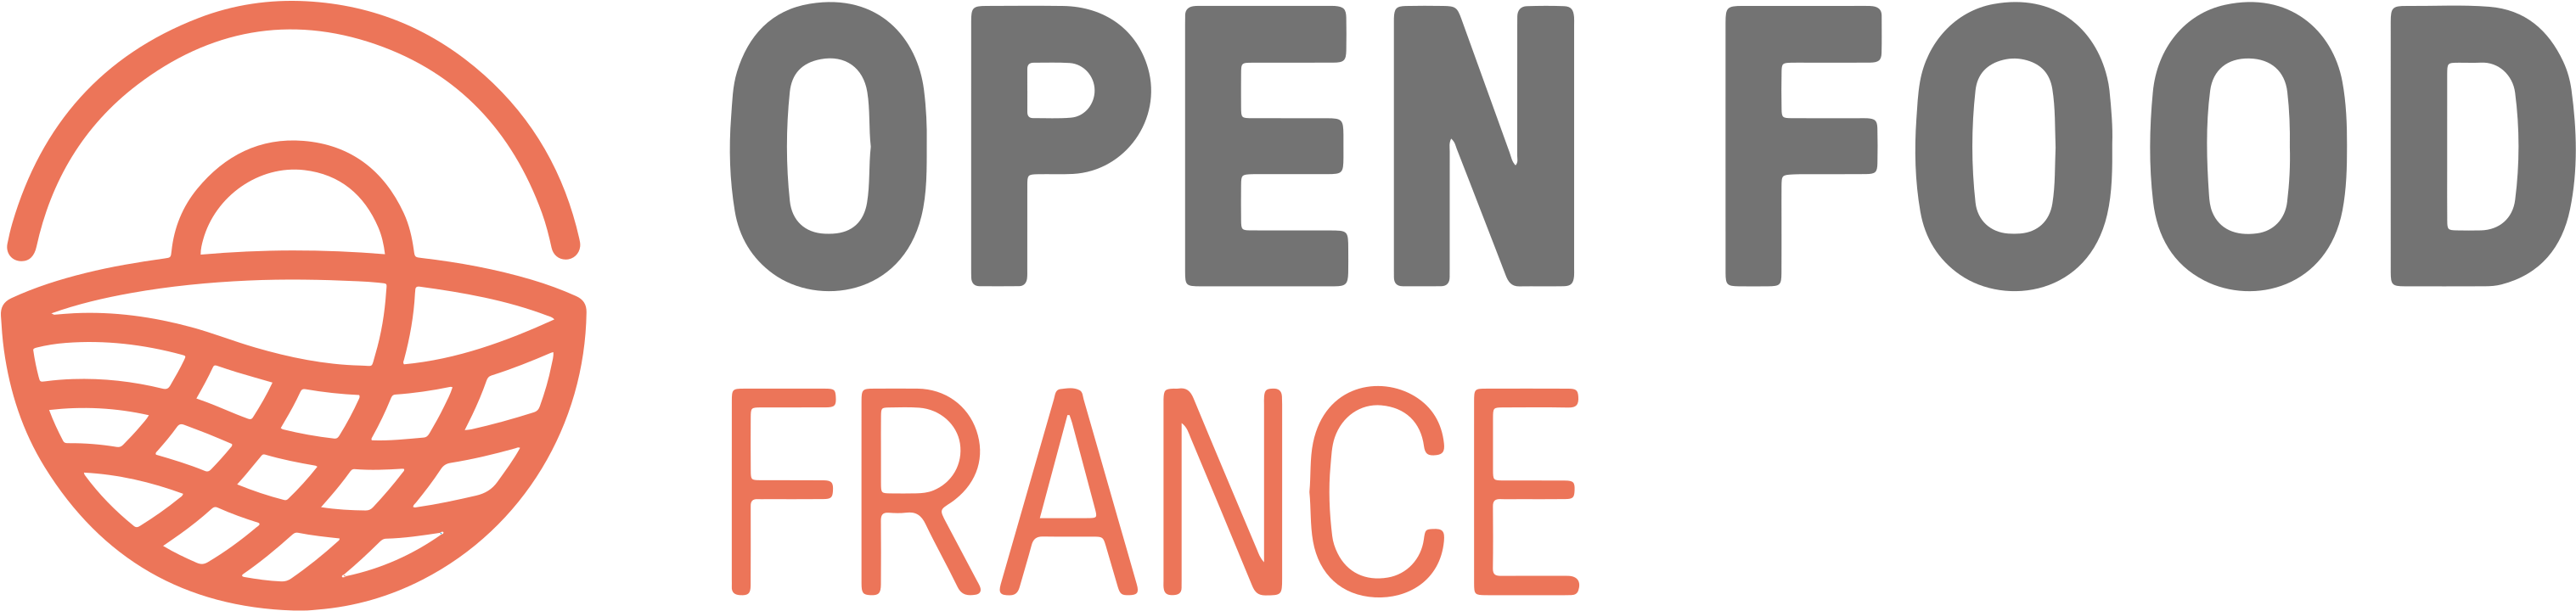 Open Food France (3112x788), Png Download